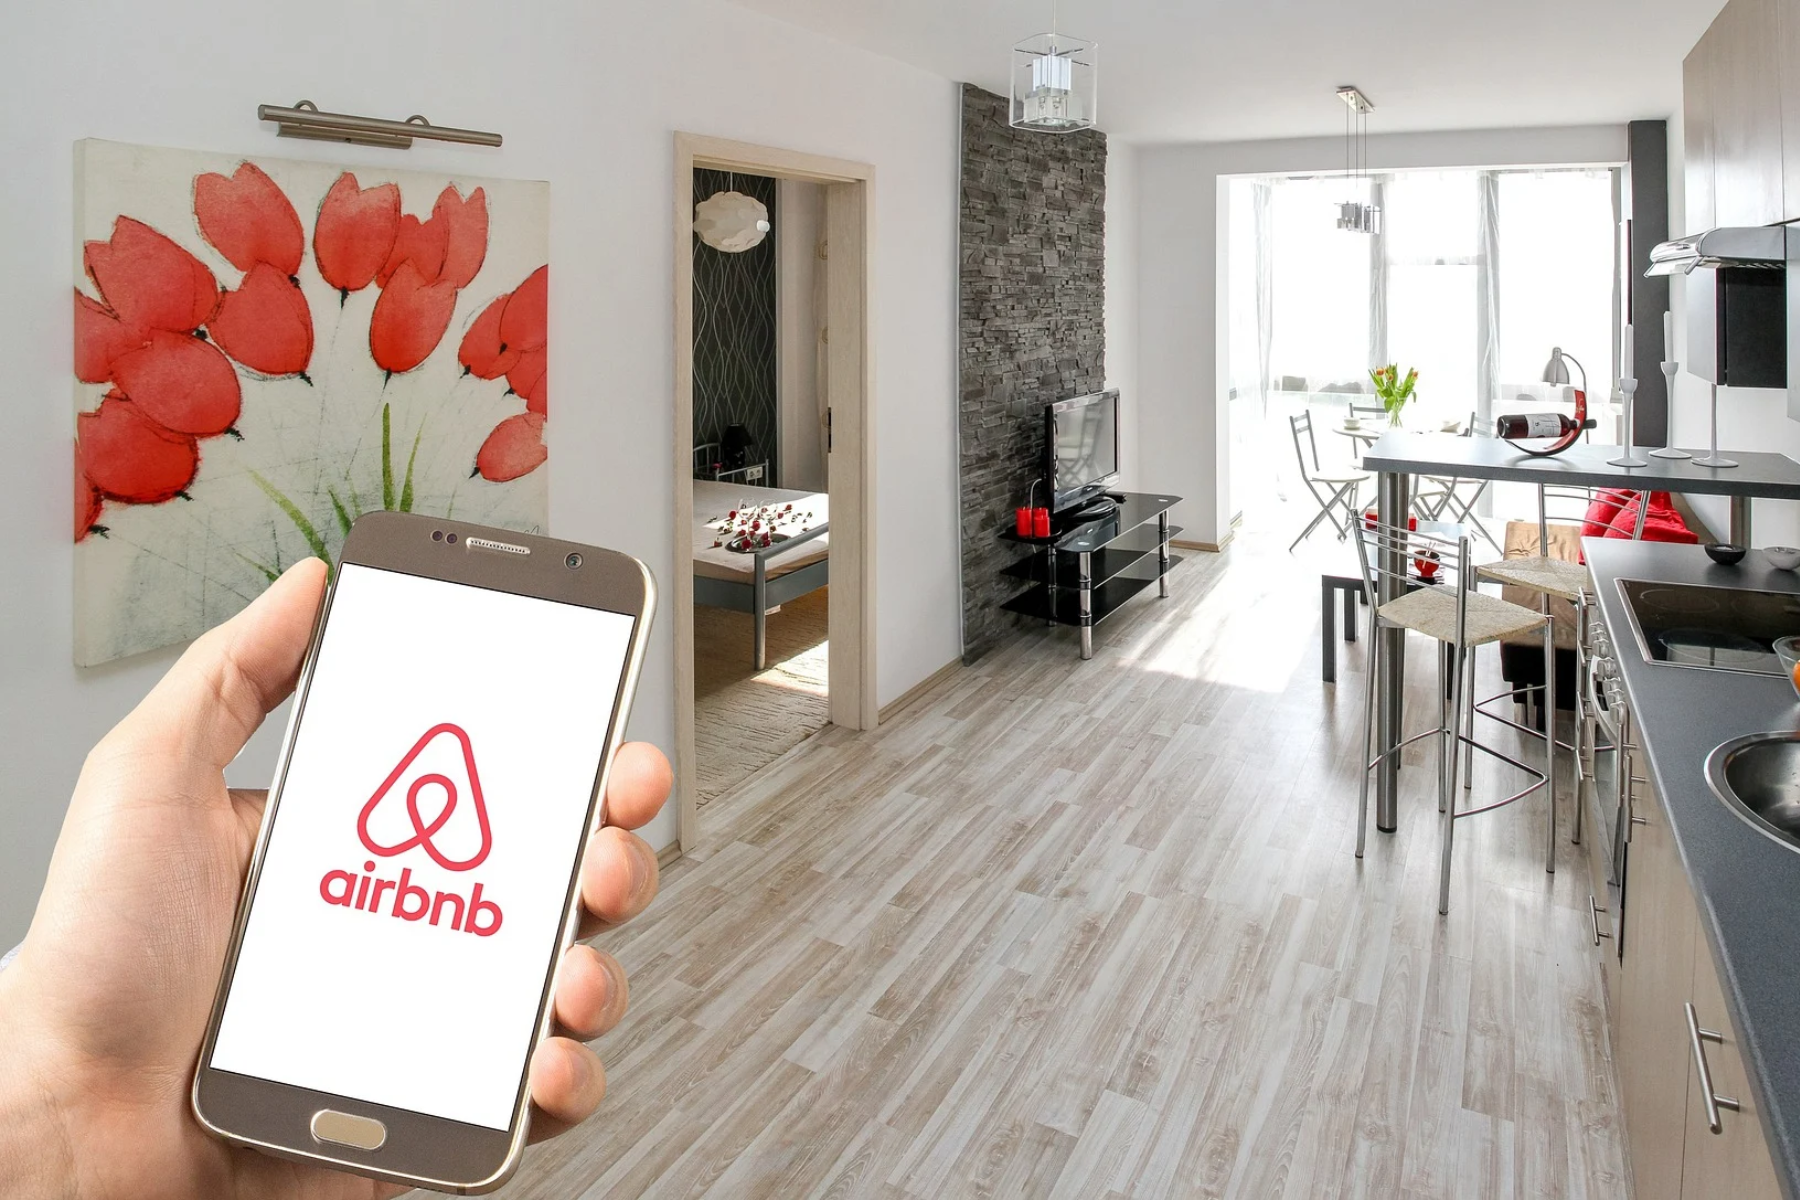 In front of the actual Airbnb, a man's hand holds a phone with the Airbnb logo